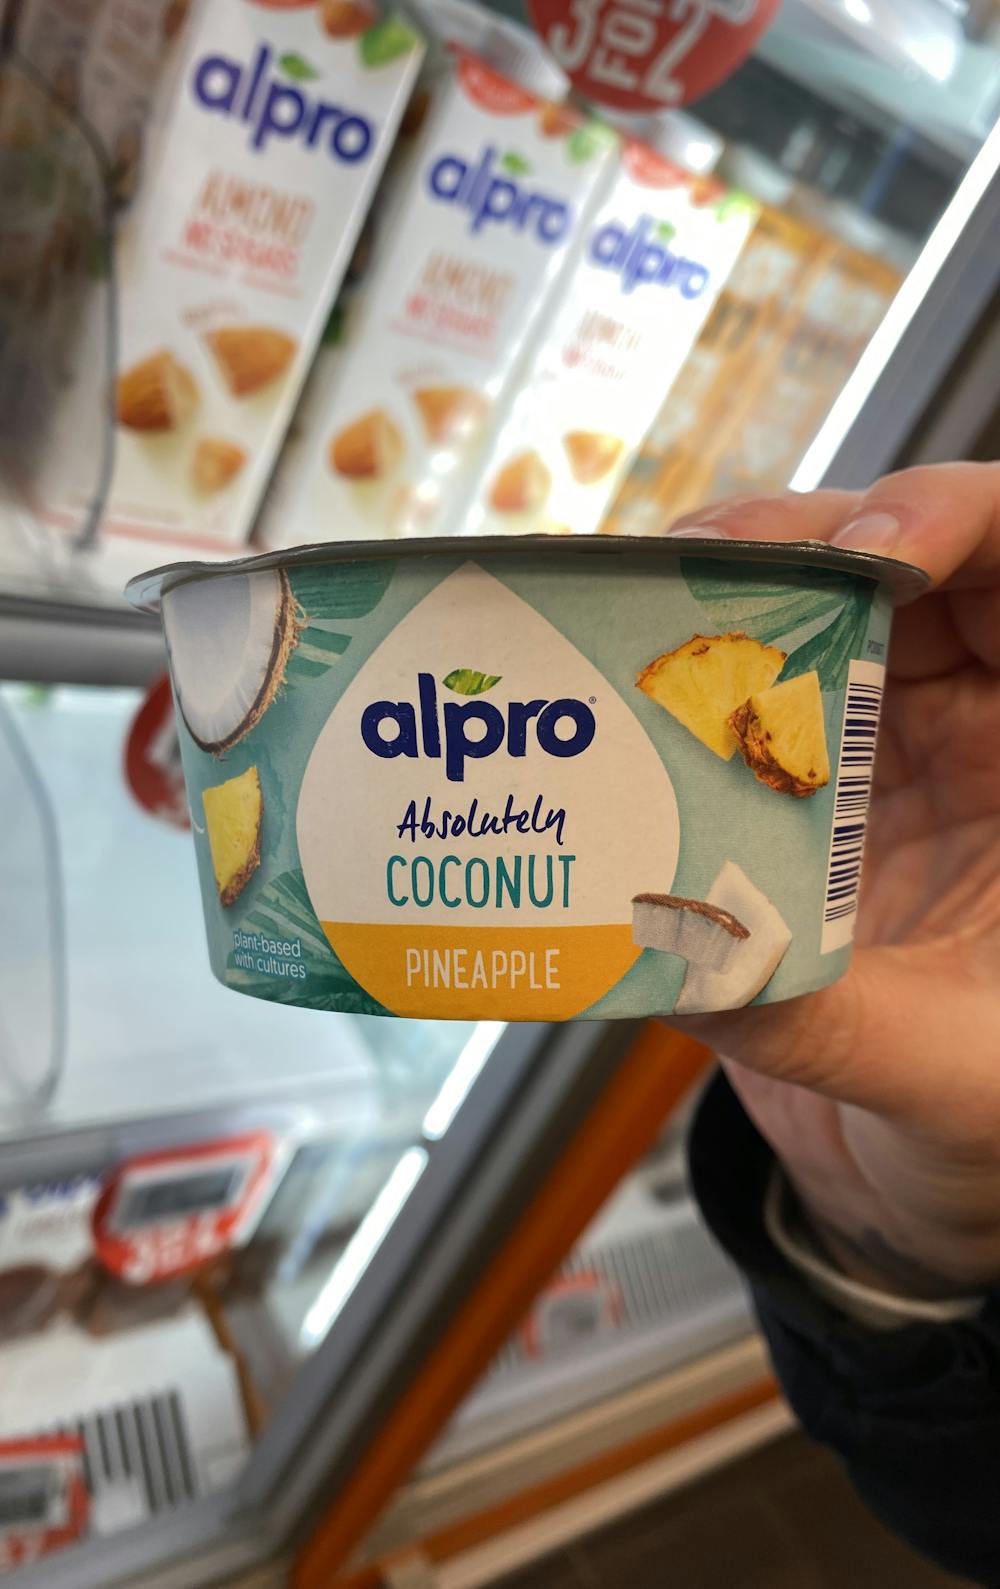 Absolutely coconut, pineapple, Alpro